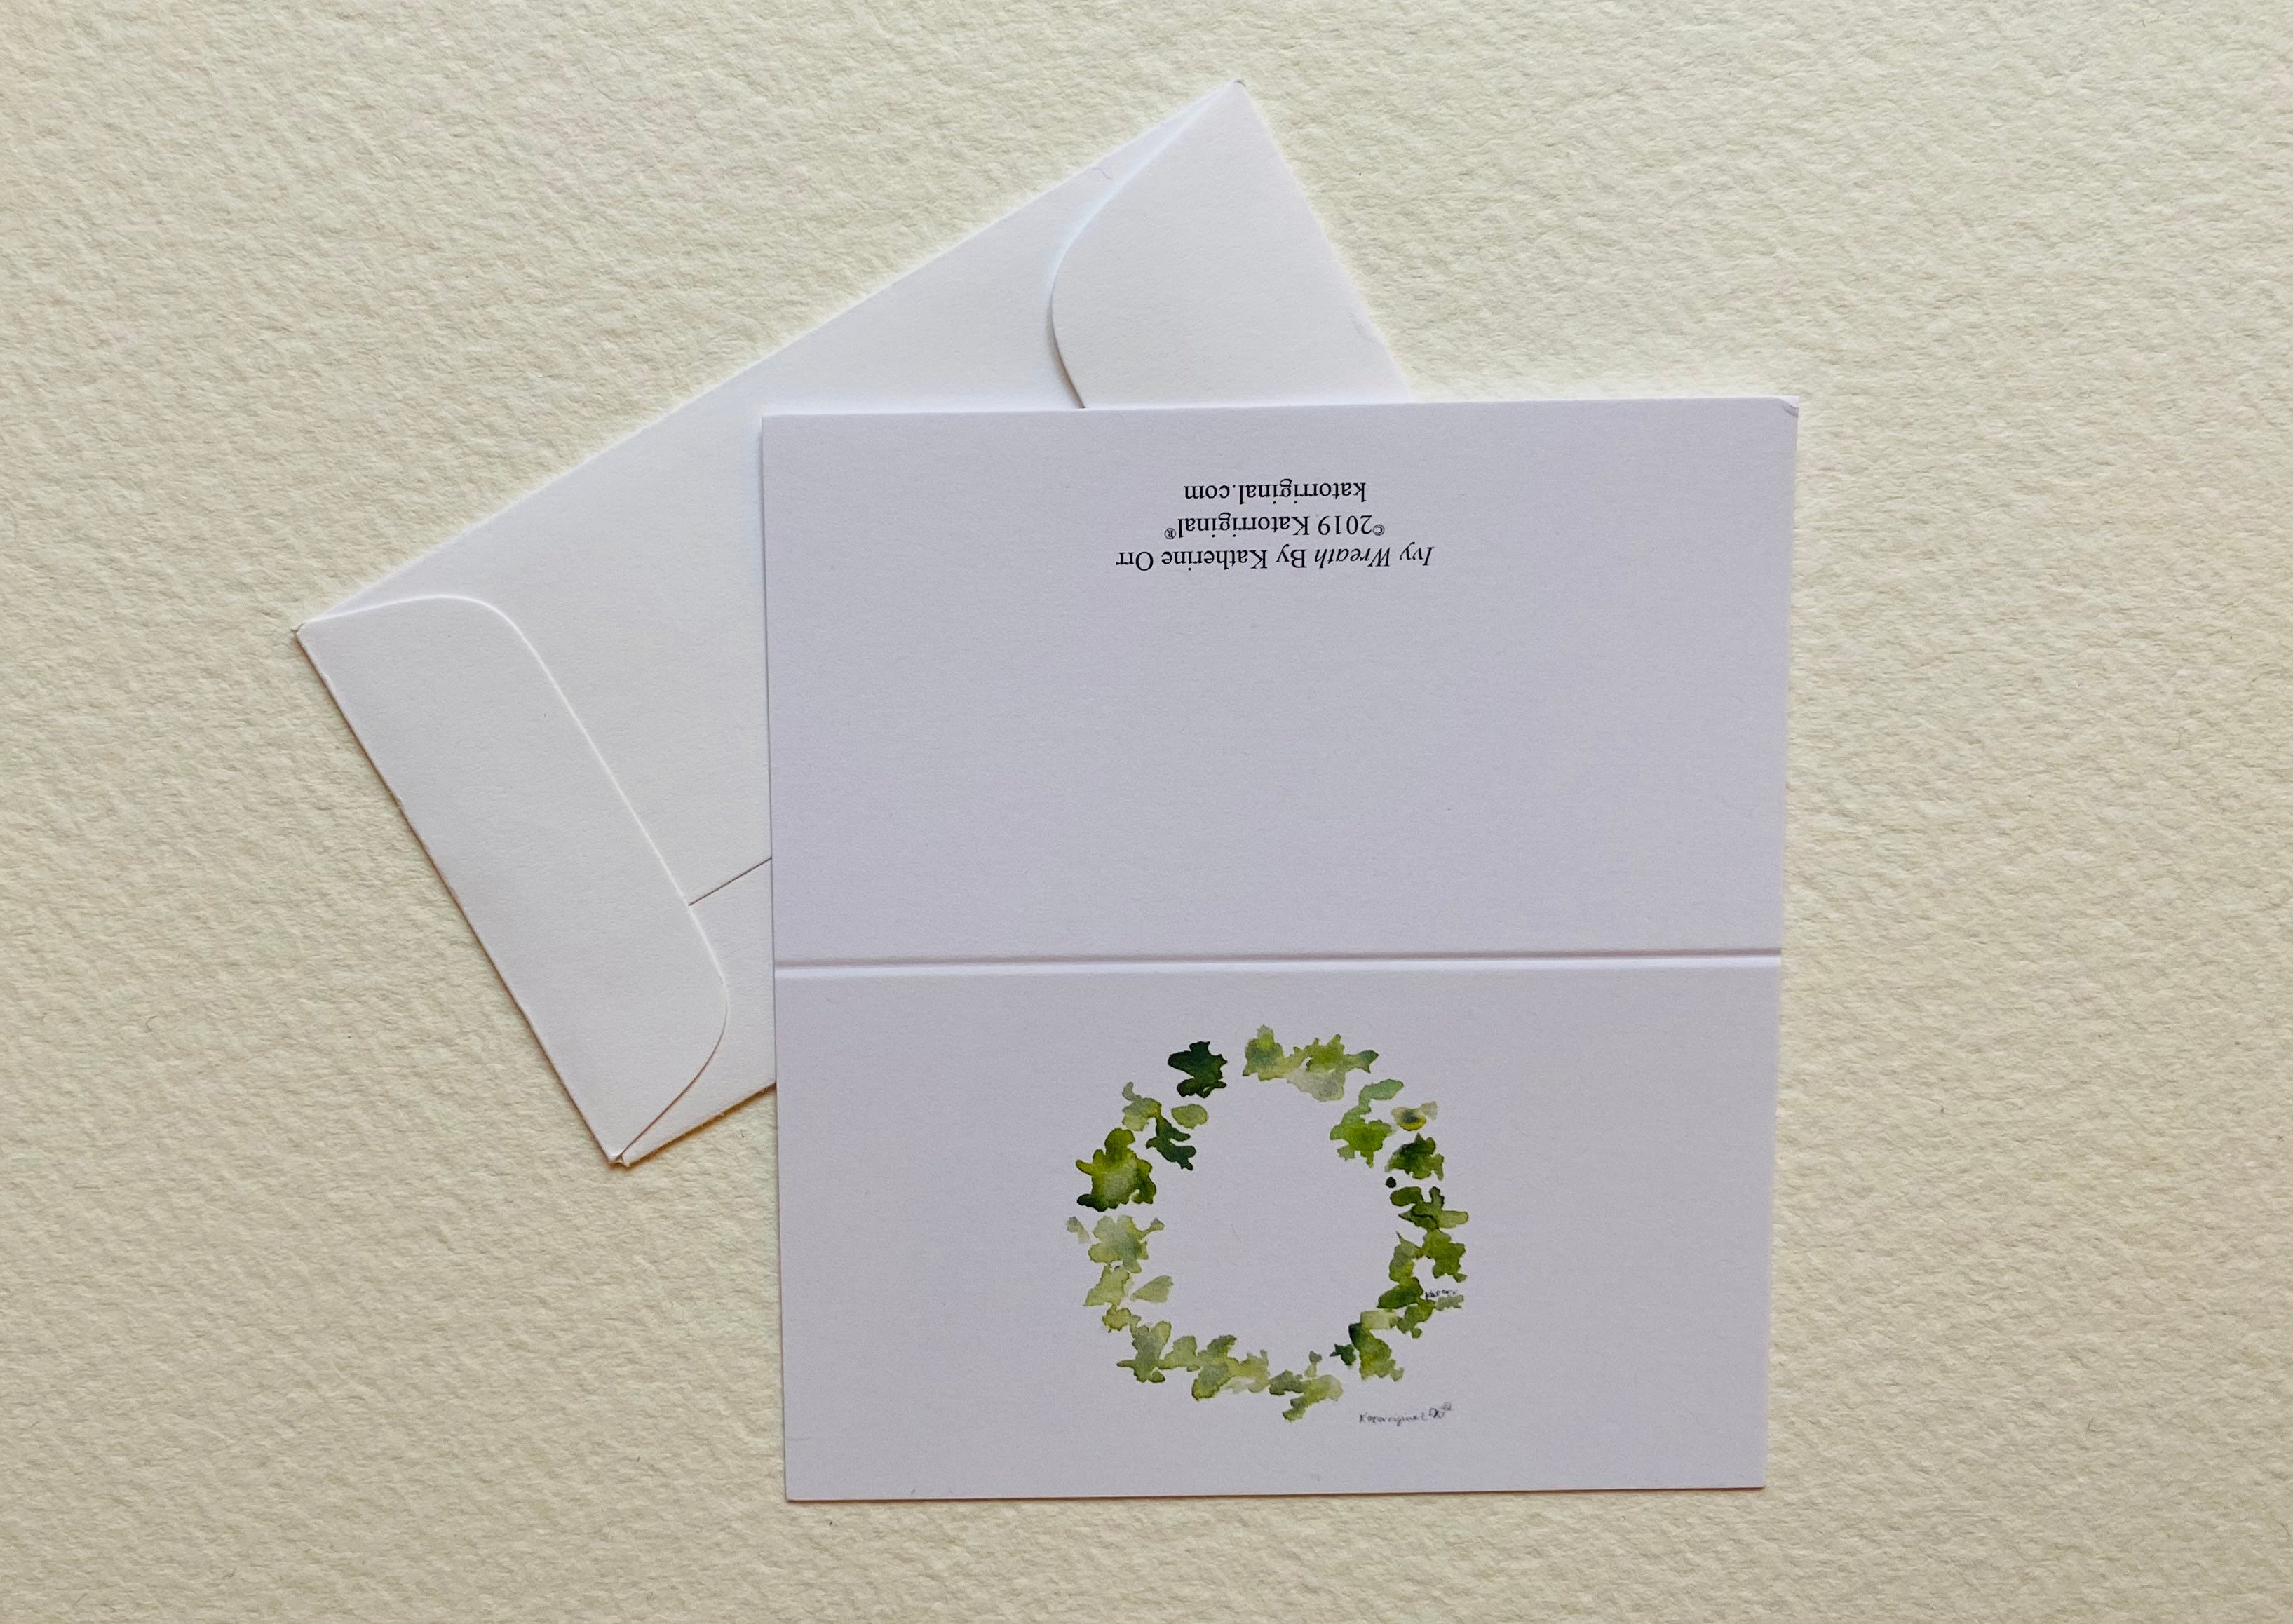 Ivy Wreath Gift Cards